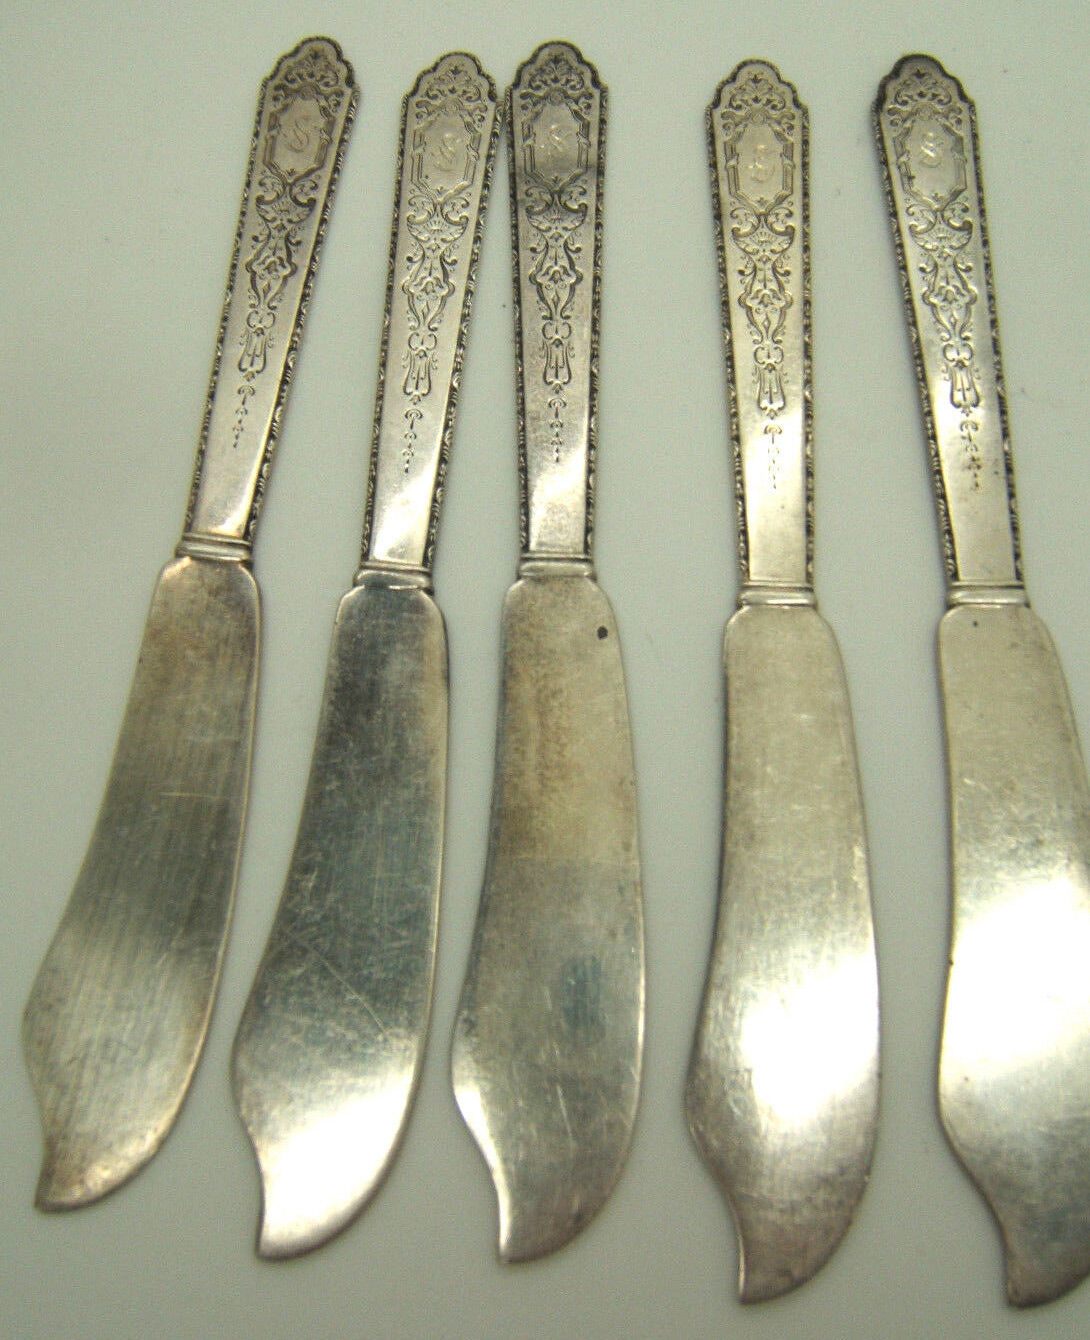 5 LUNT Sterling Silver Butter Knives Spreaders Treasure William & Mary Decor